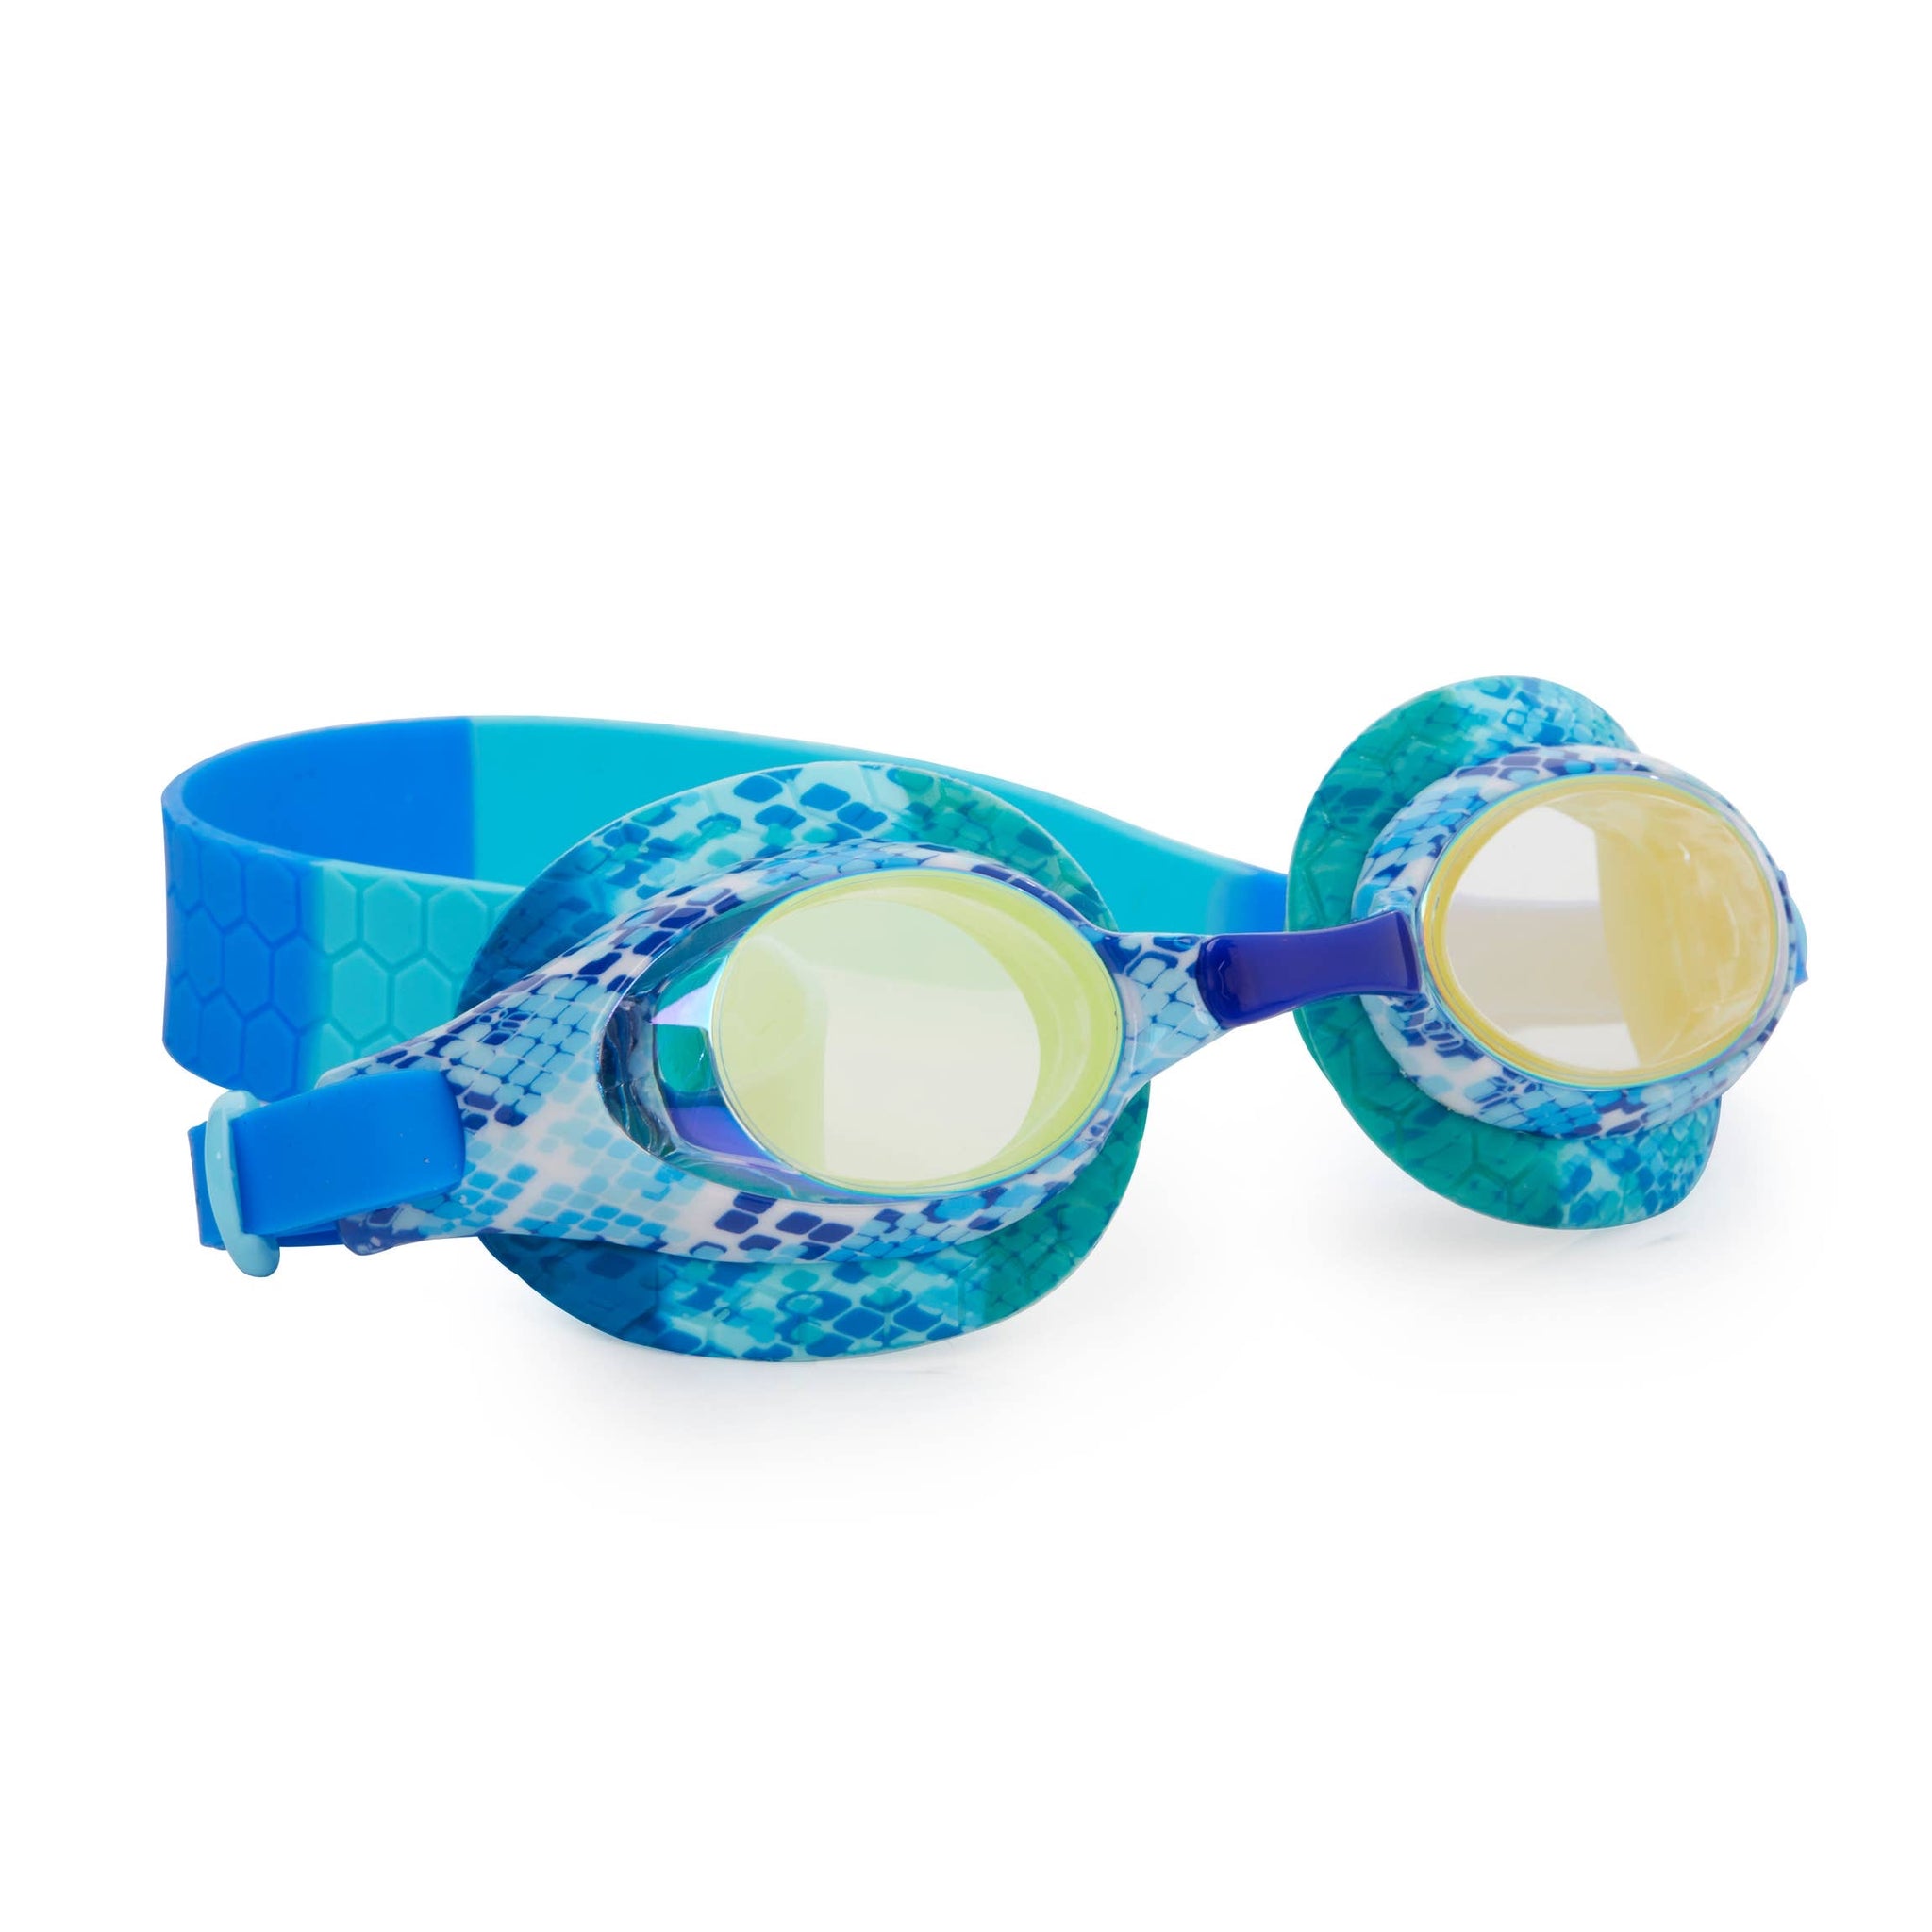 Jake the Snake Goggles blue